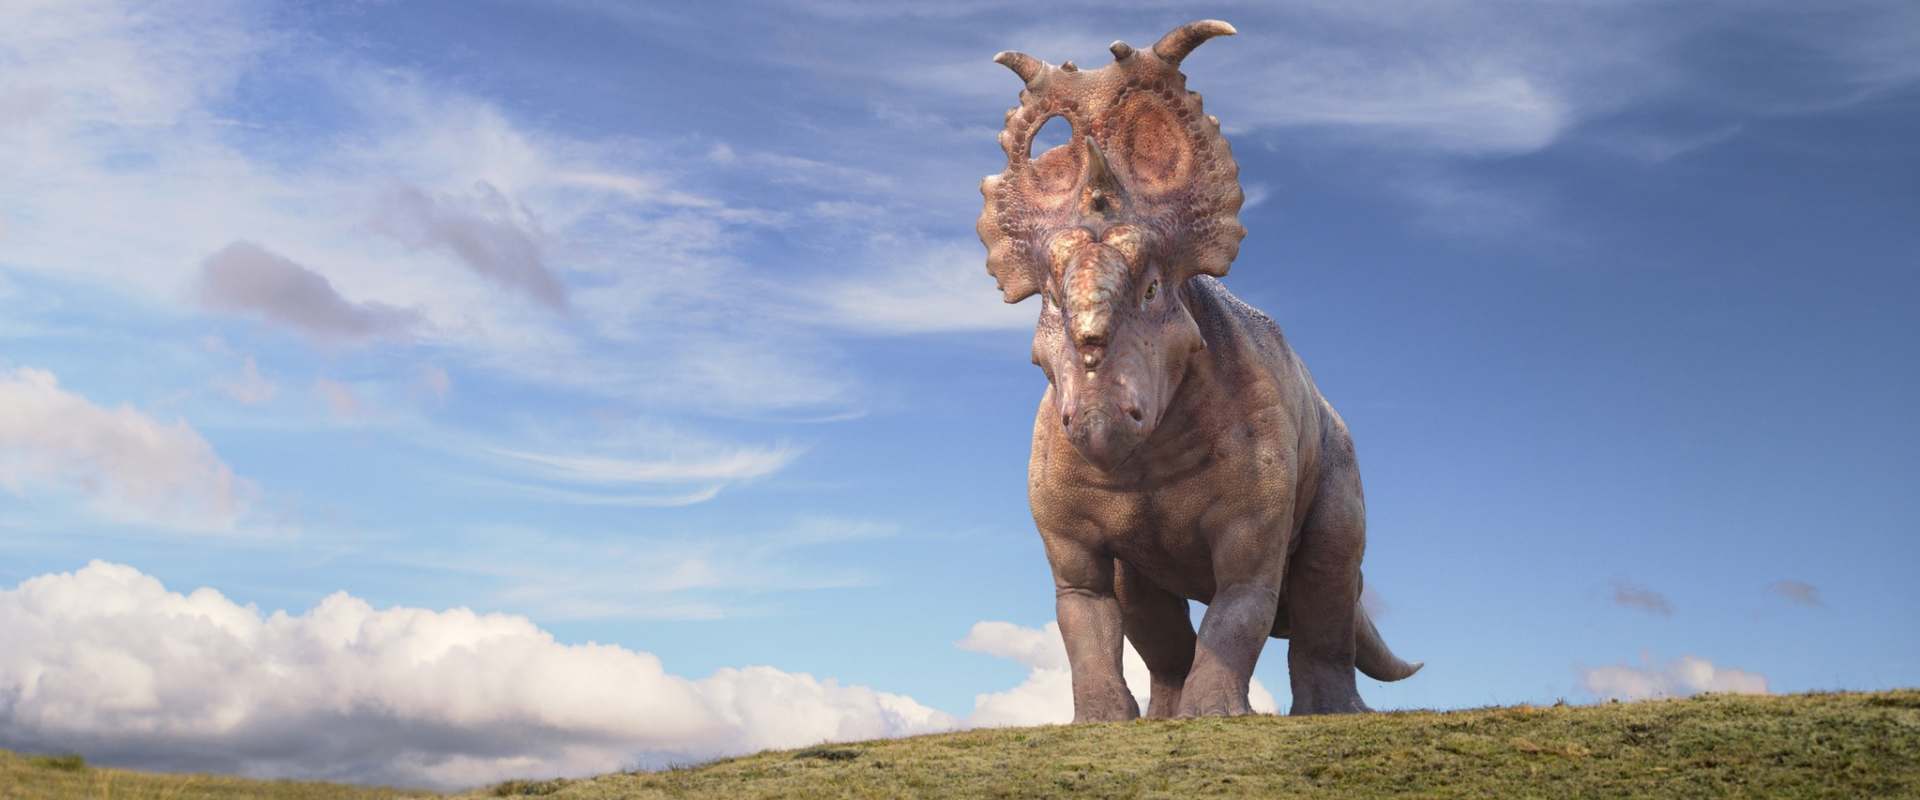 Walking with Dinosaurs 3D background 2